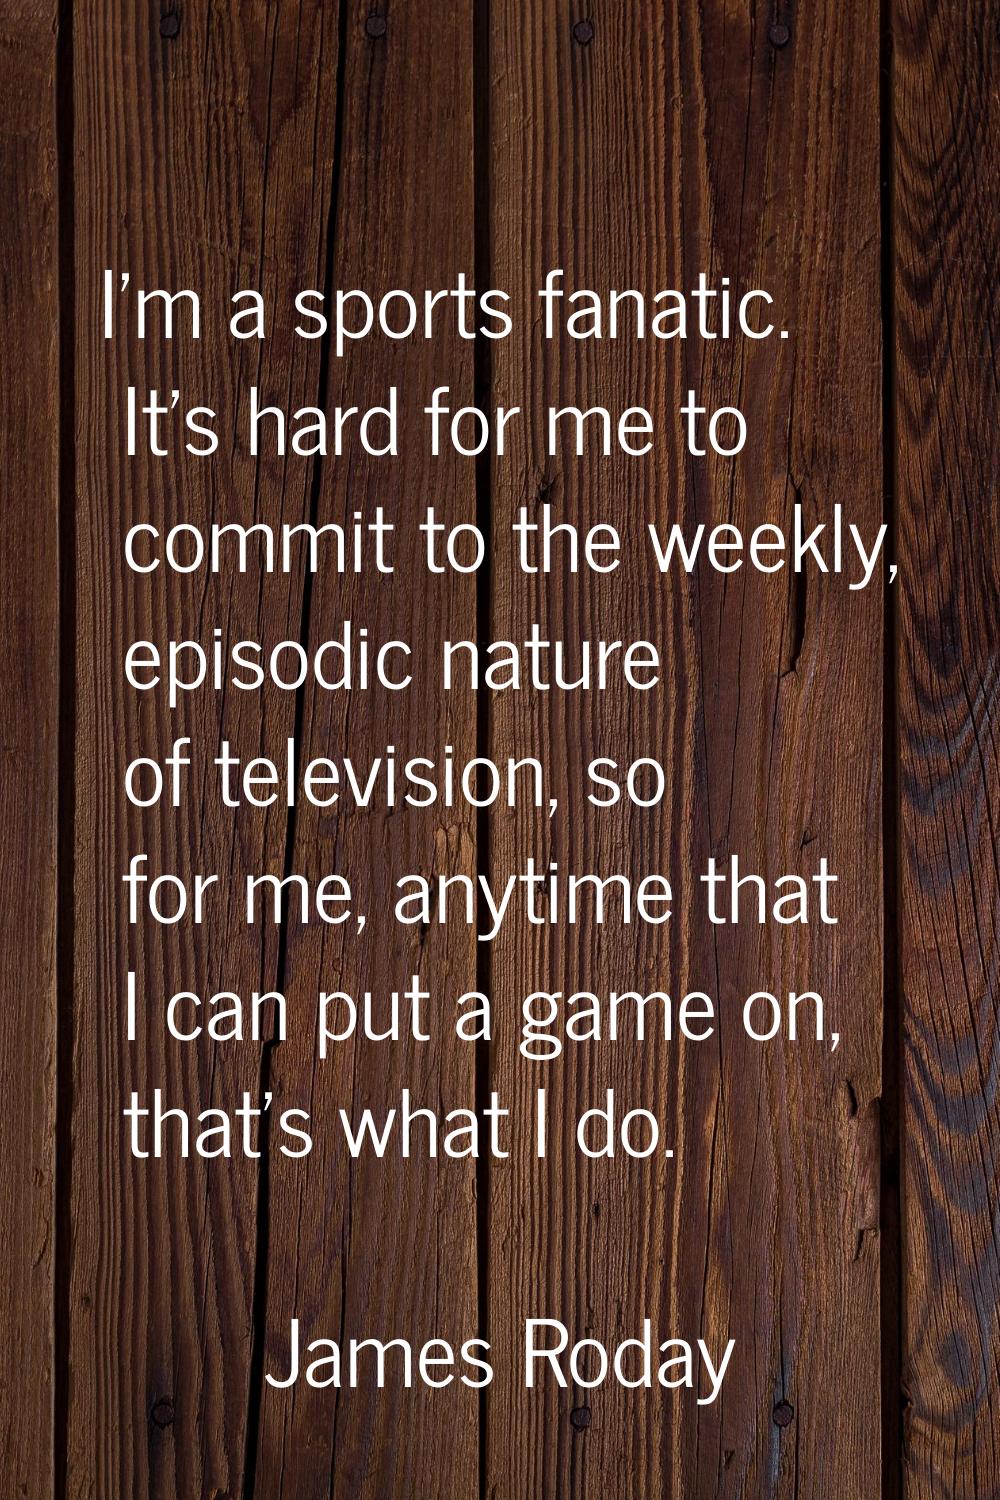 I'm a sports fanatic. It's hard for me to commit to the weekly, episodic nature of television, so f